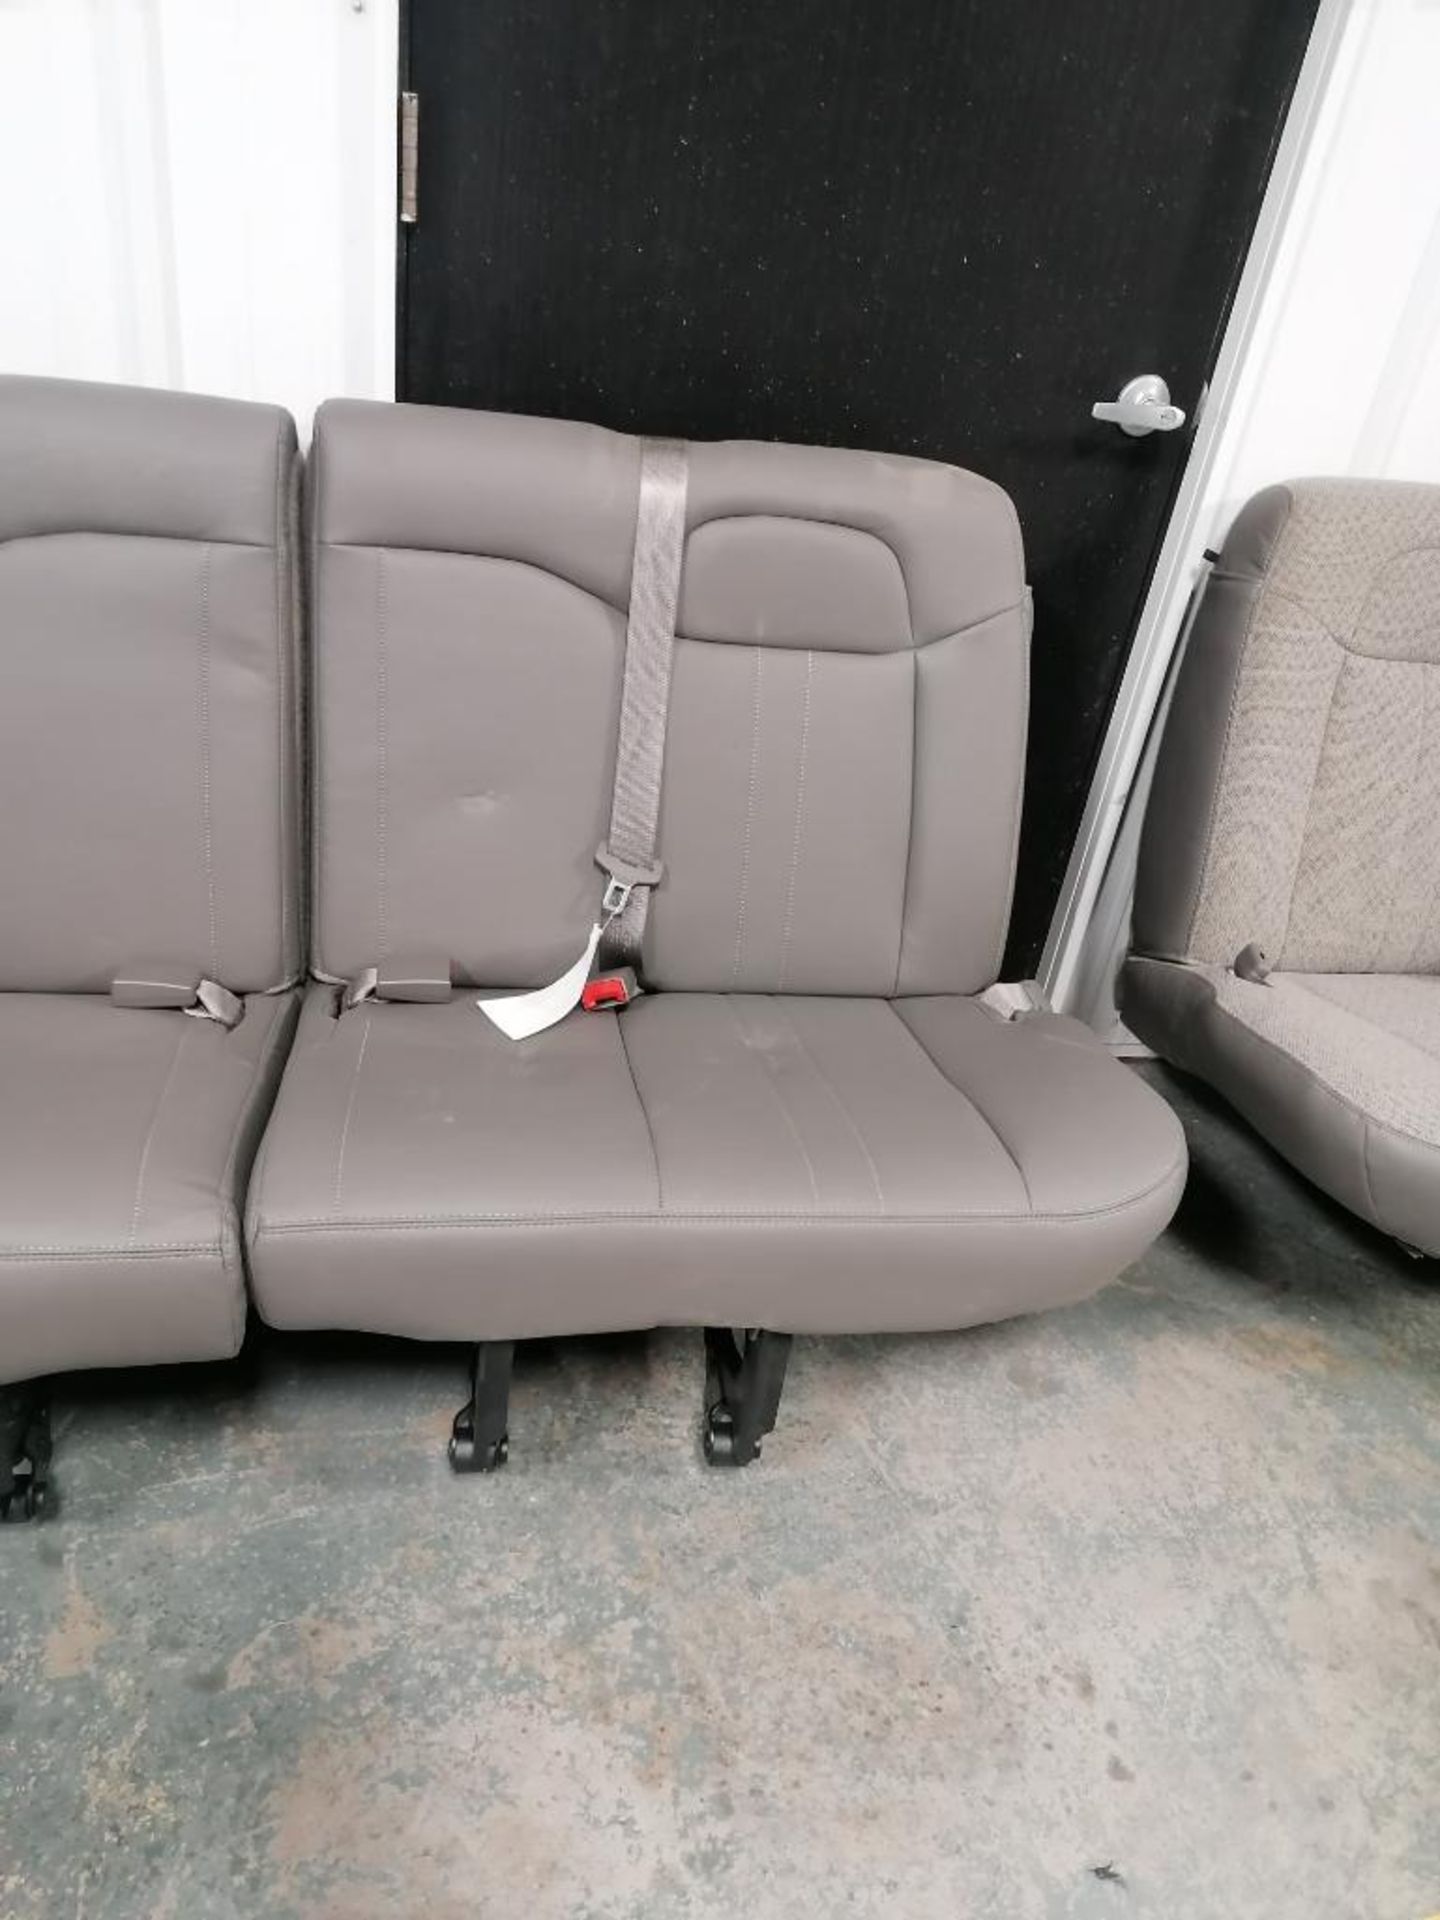 NEW 2021 Chevrolet Express Passenger Seat Row. Located in Mt. Pleasant, IA. - Image 2 of 4